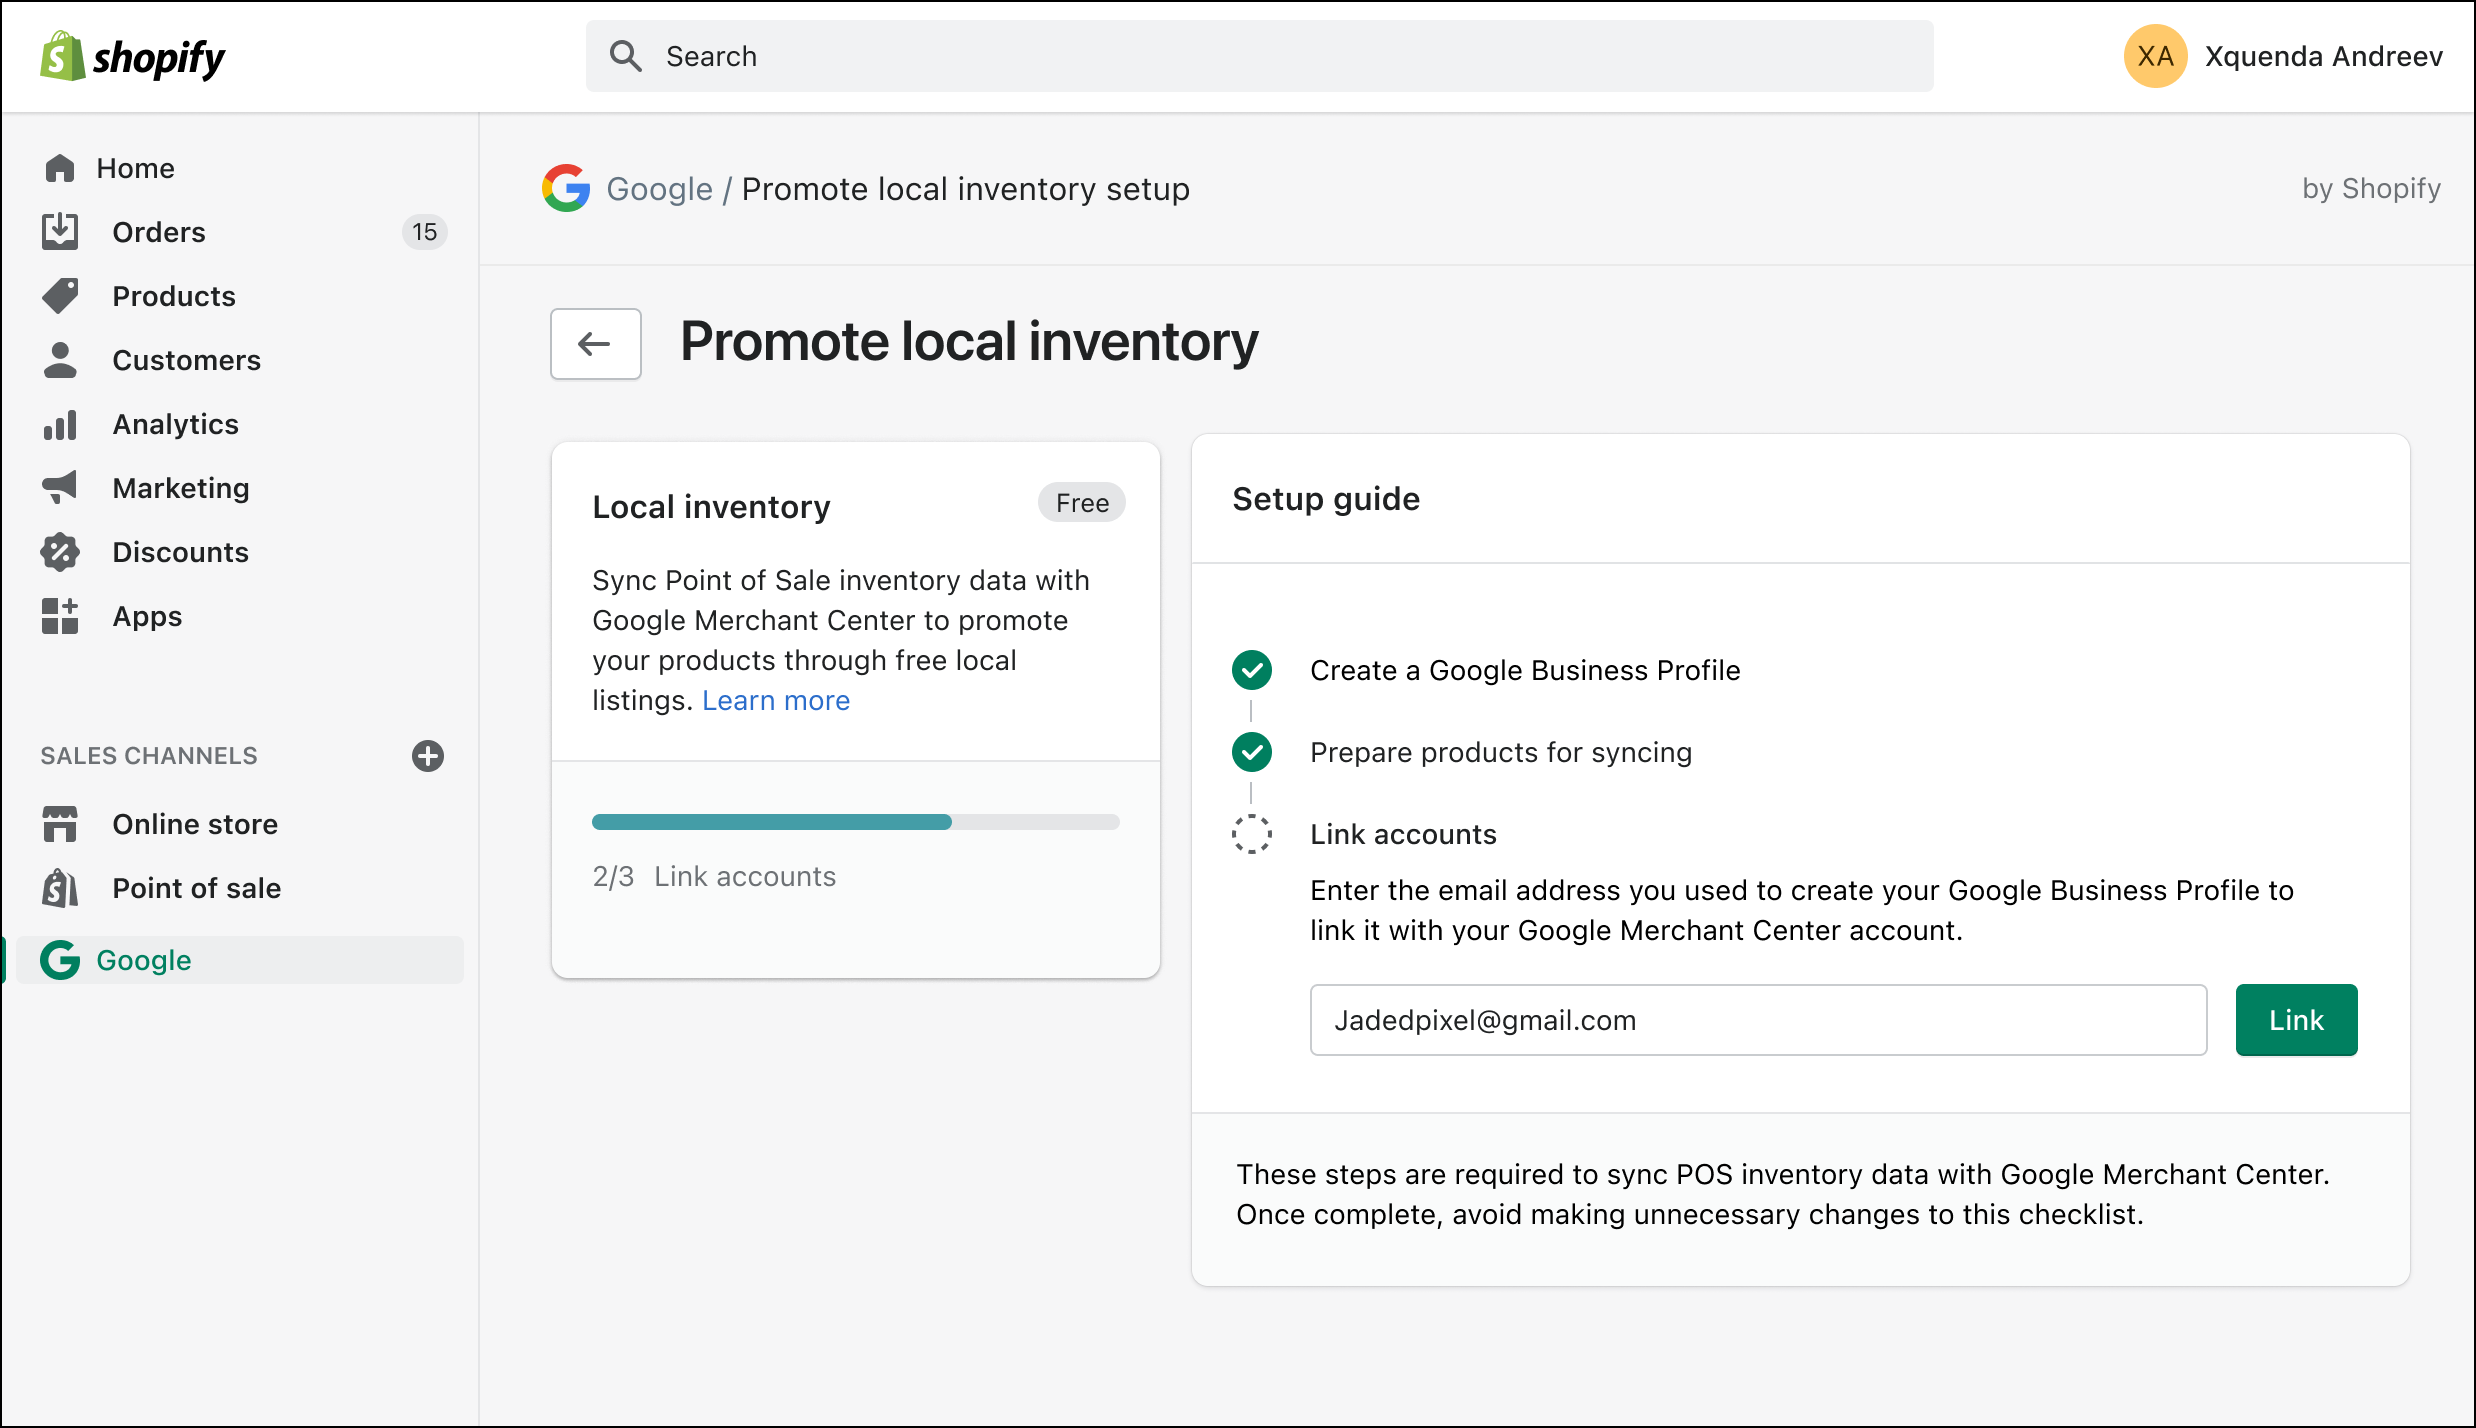 Step 3 for setting up Google local inventory in the Google & YouTube app for Shopify